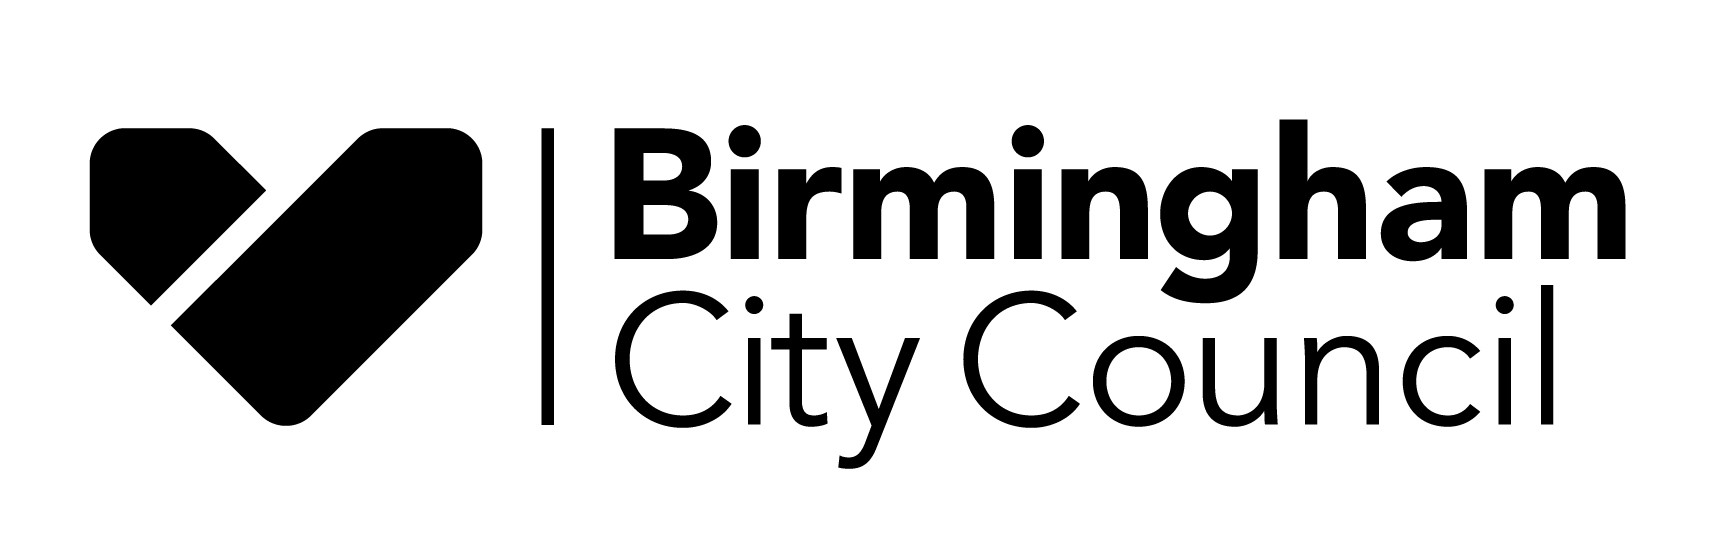 A logo for the local council